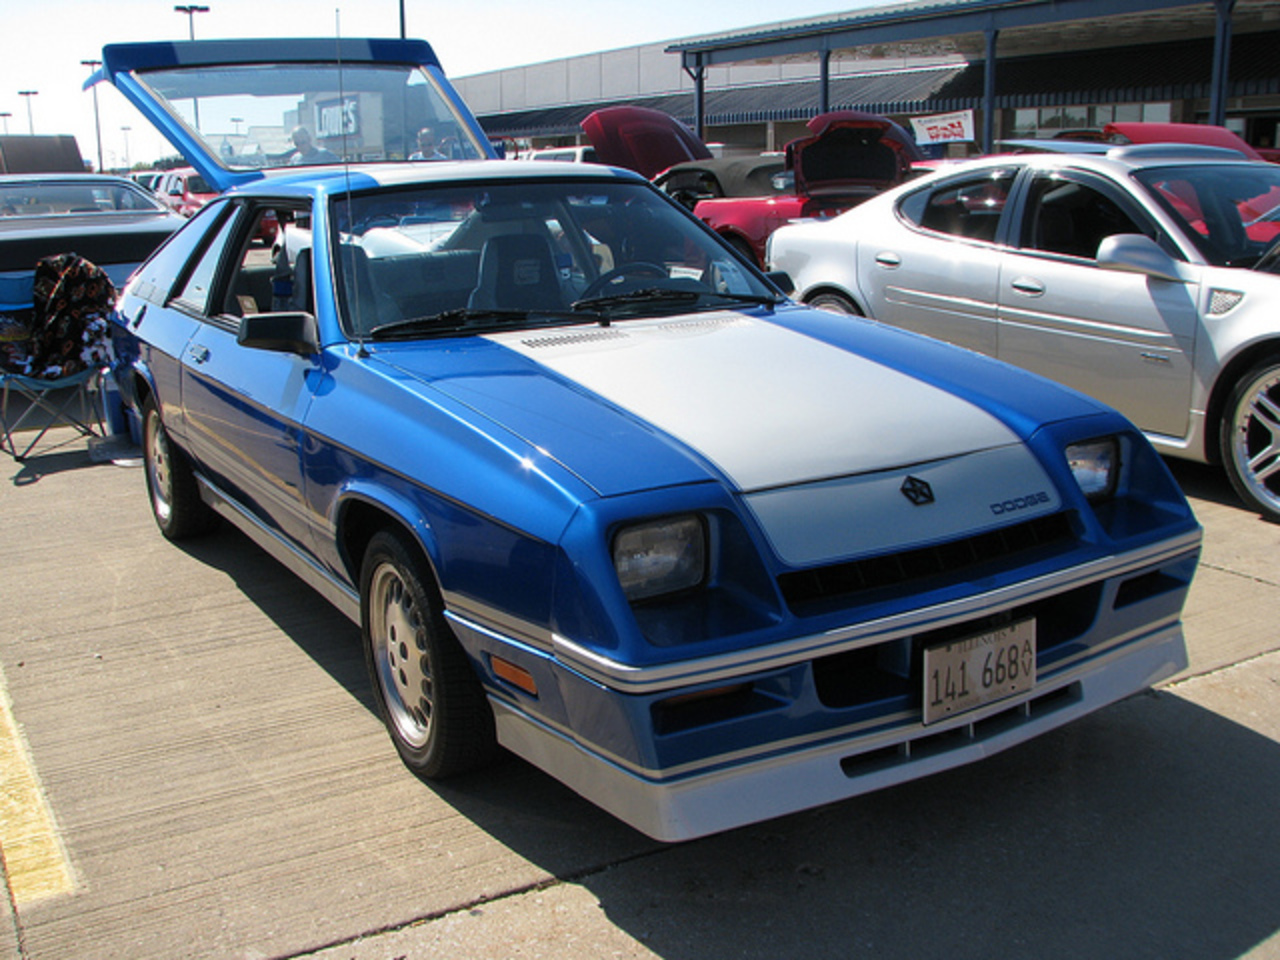 1983 Dodge Shelby Charger | Flickr - Photo Sharing!